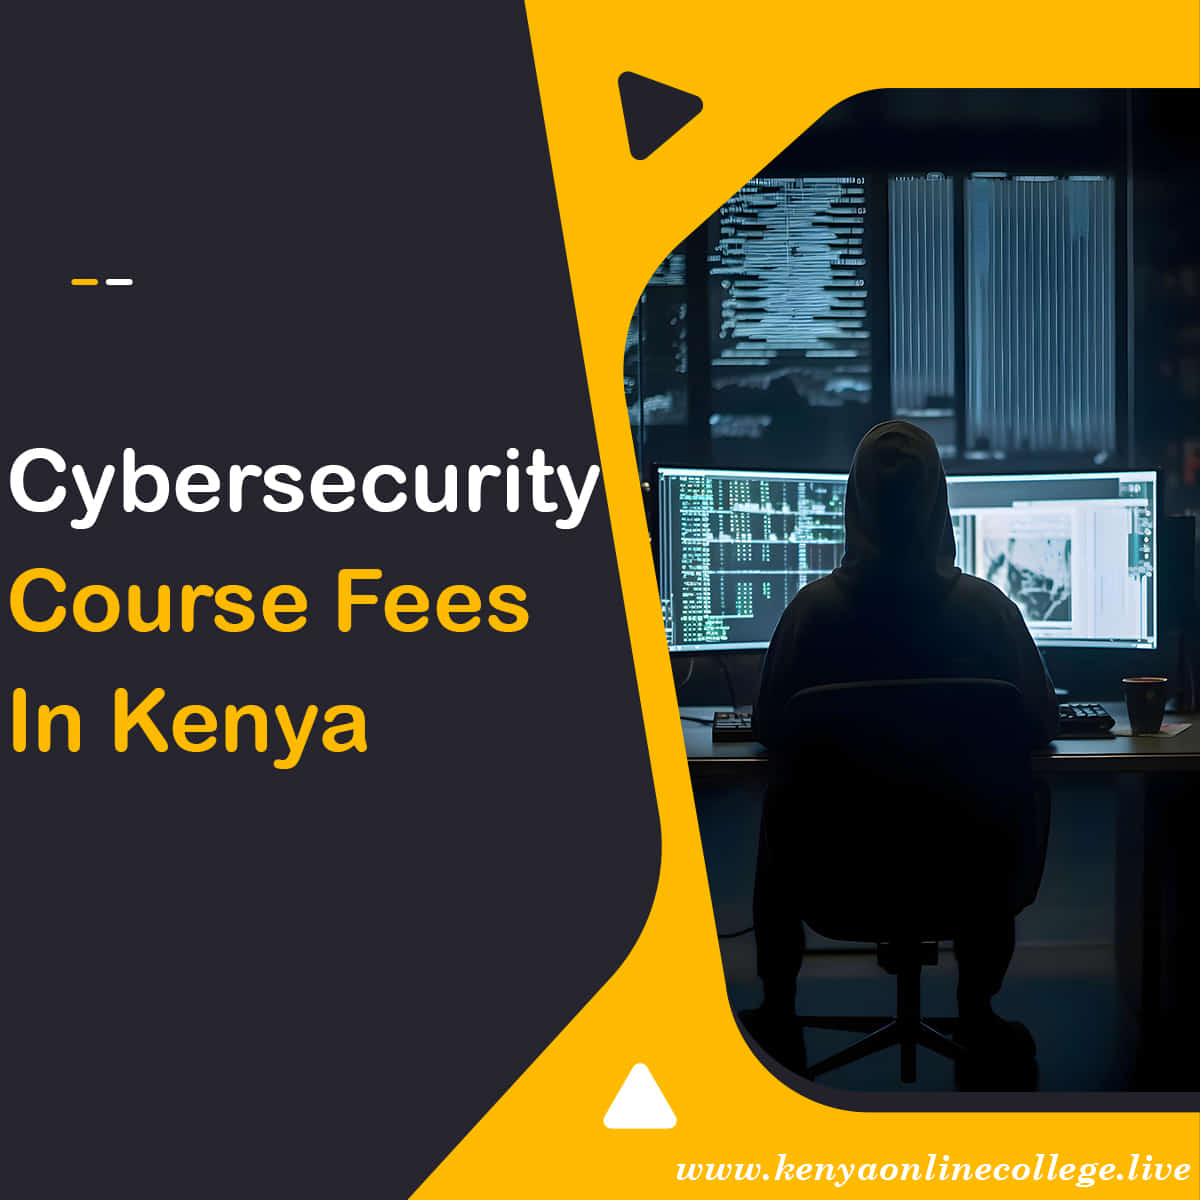 Cyber security course fees in Kenya